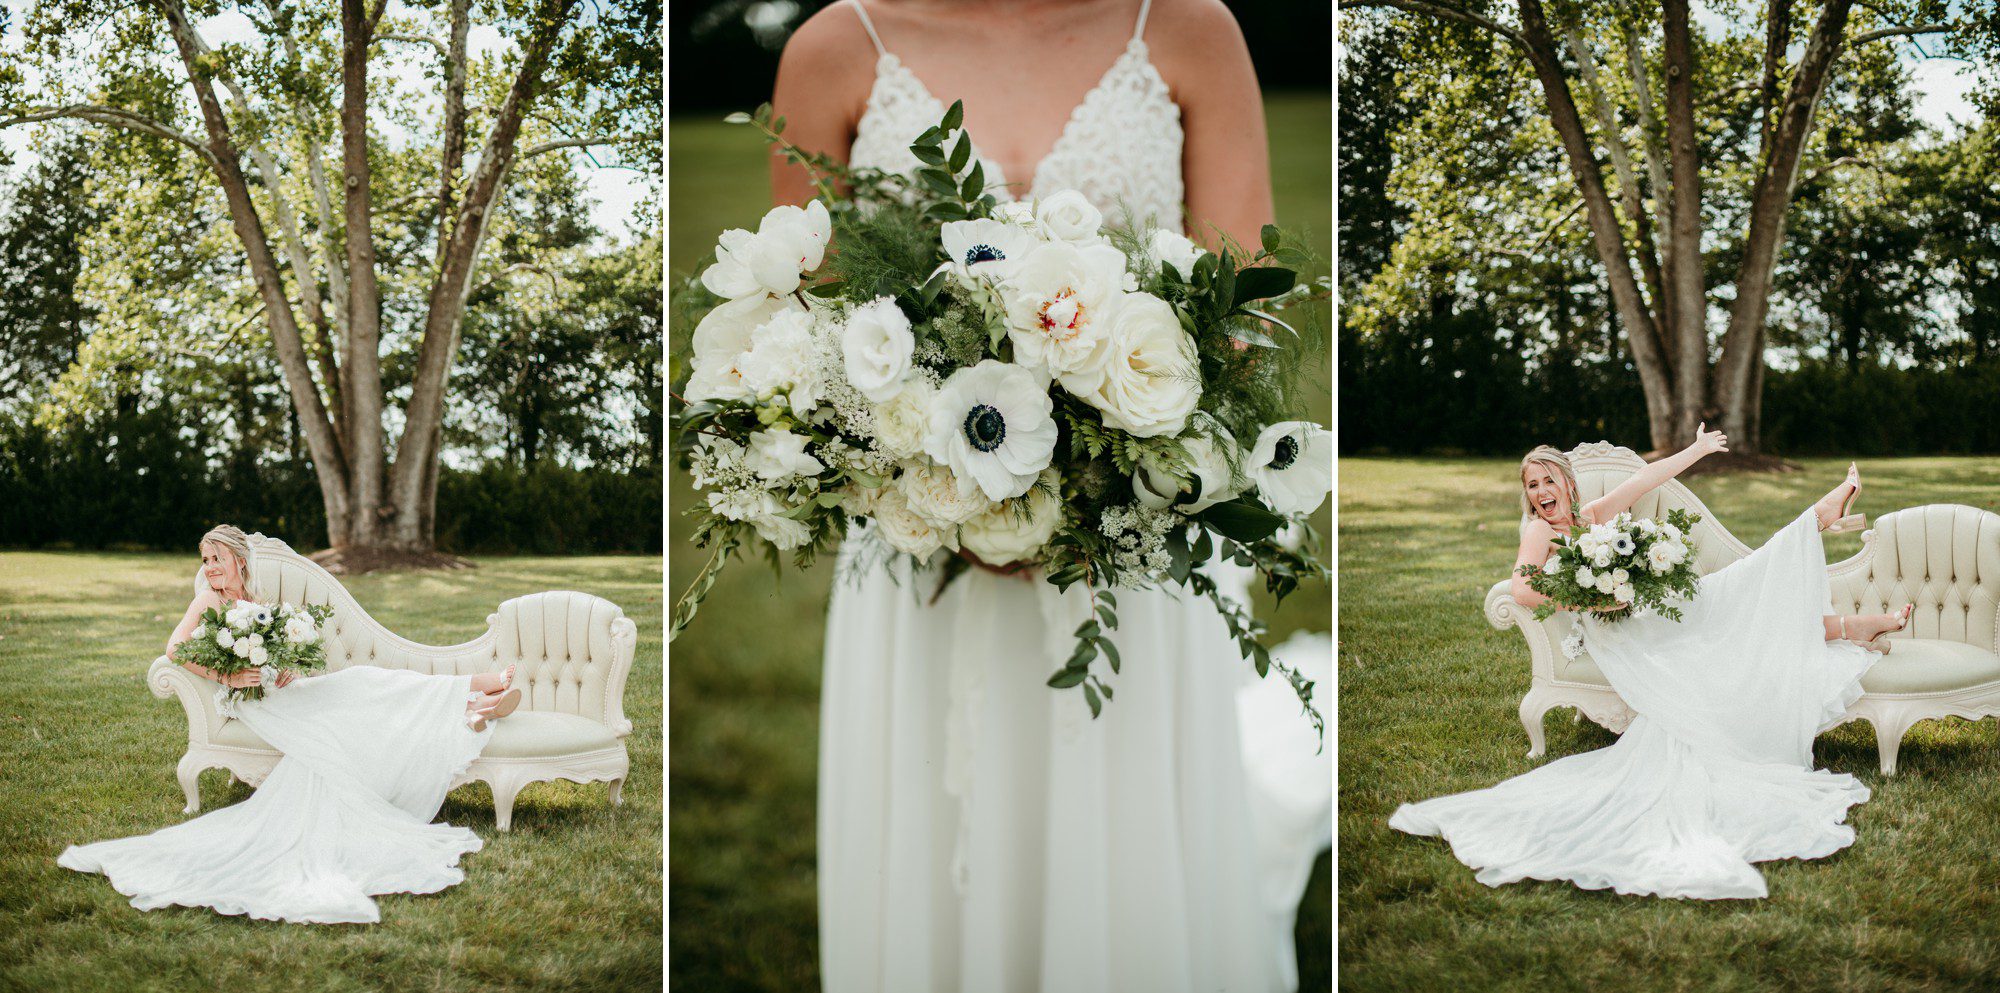 Bridal portraits with couch in field at The Barn at Sycamore Farms Arrington, TN